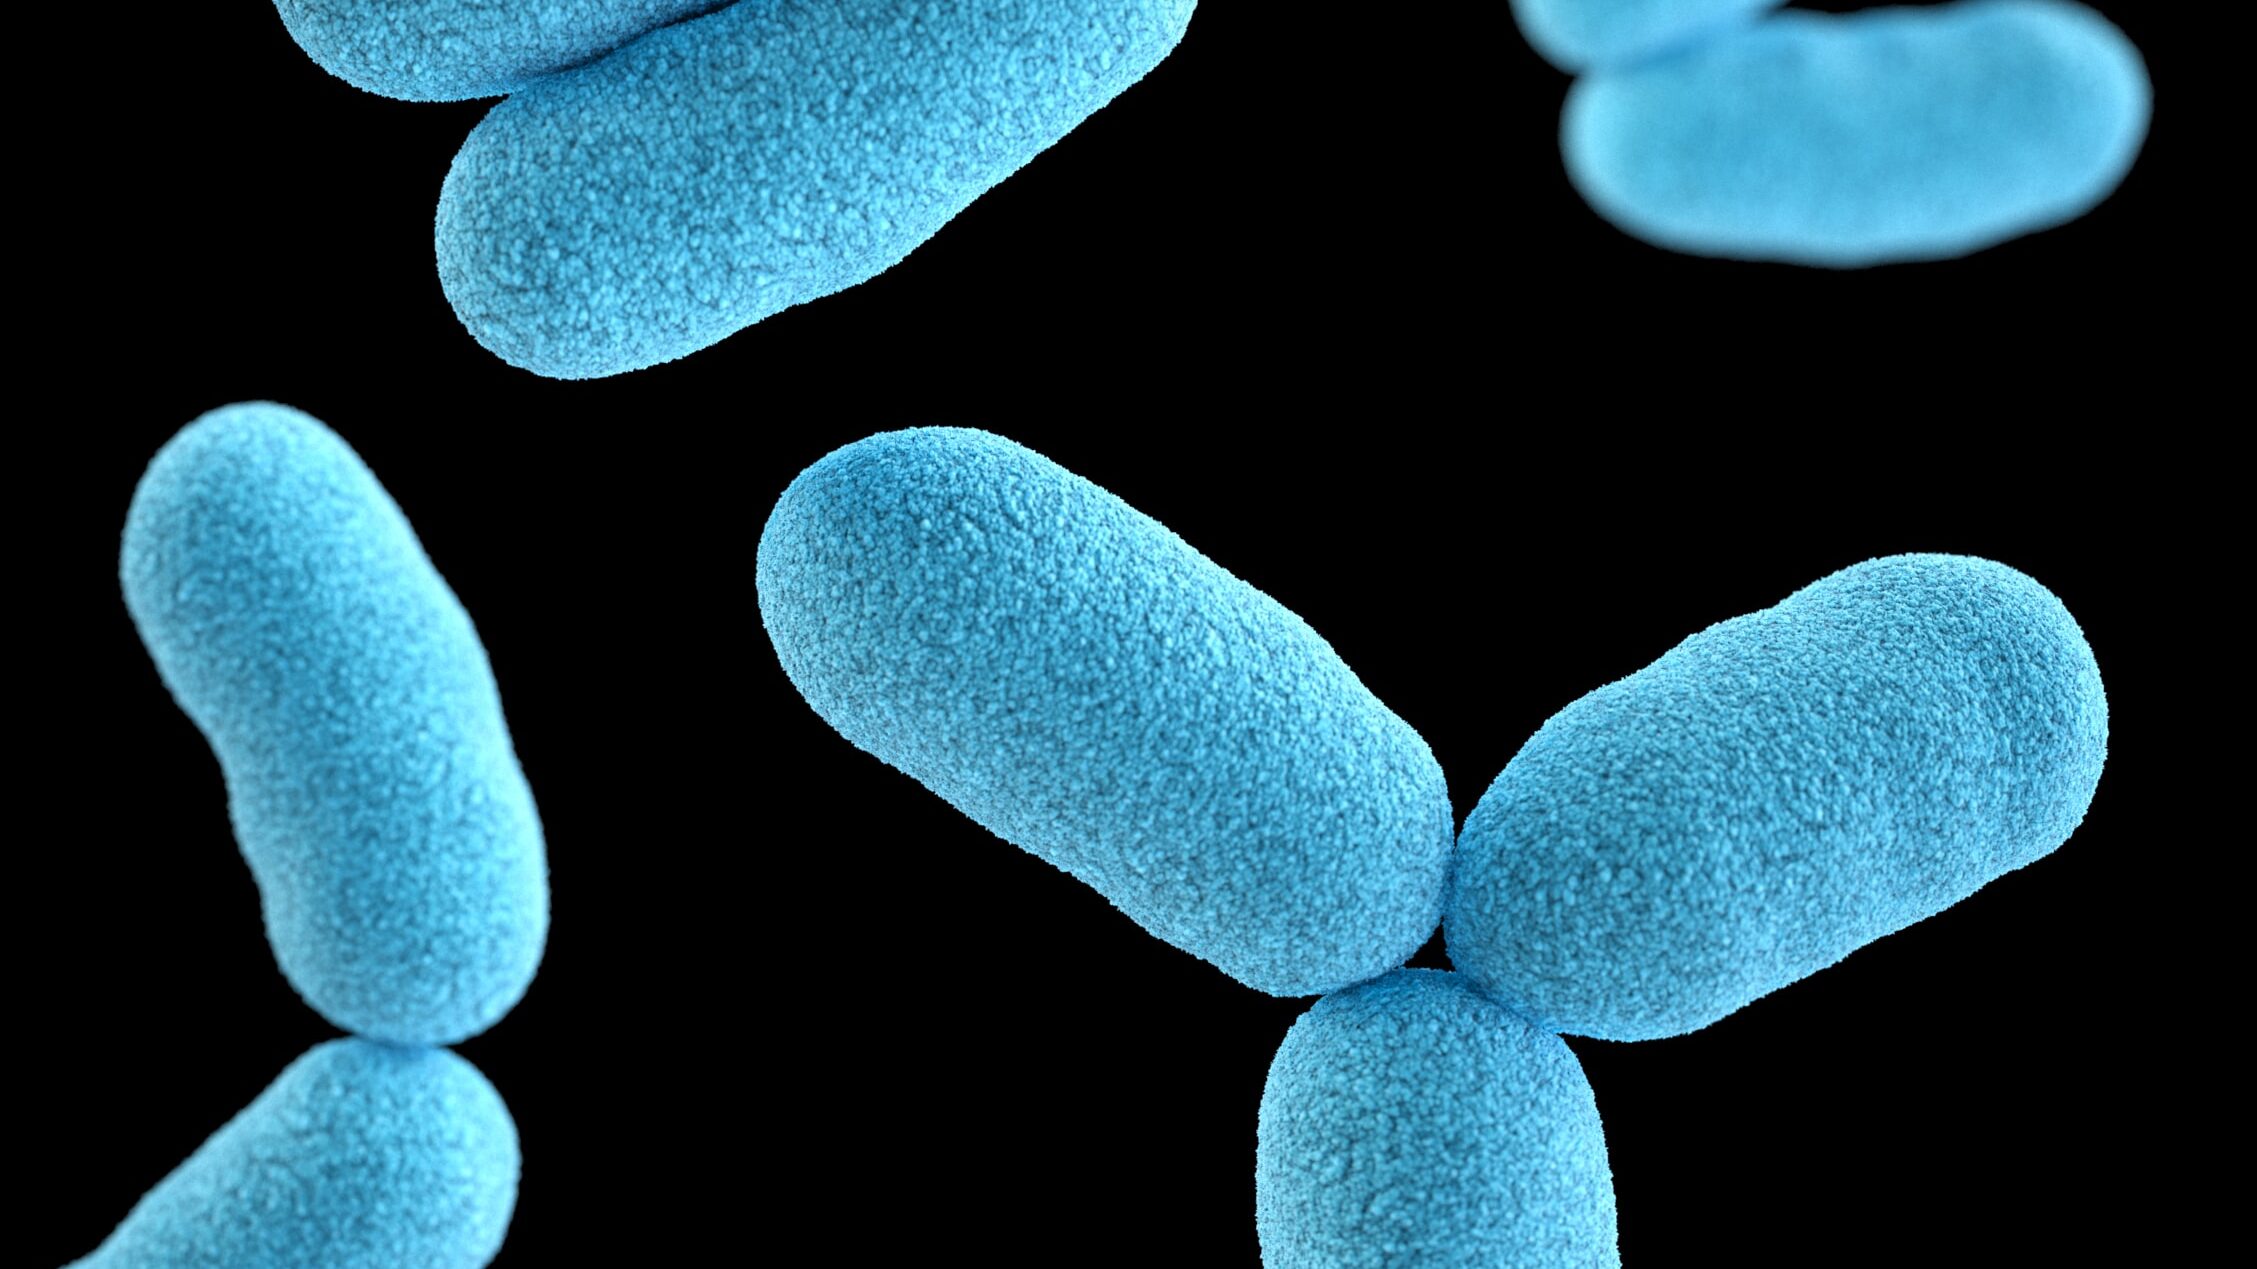 image of staphylococcus bacteria